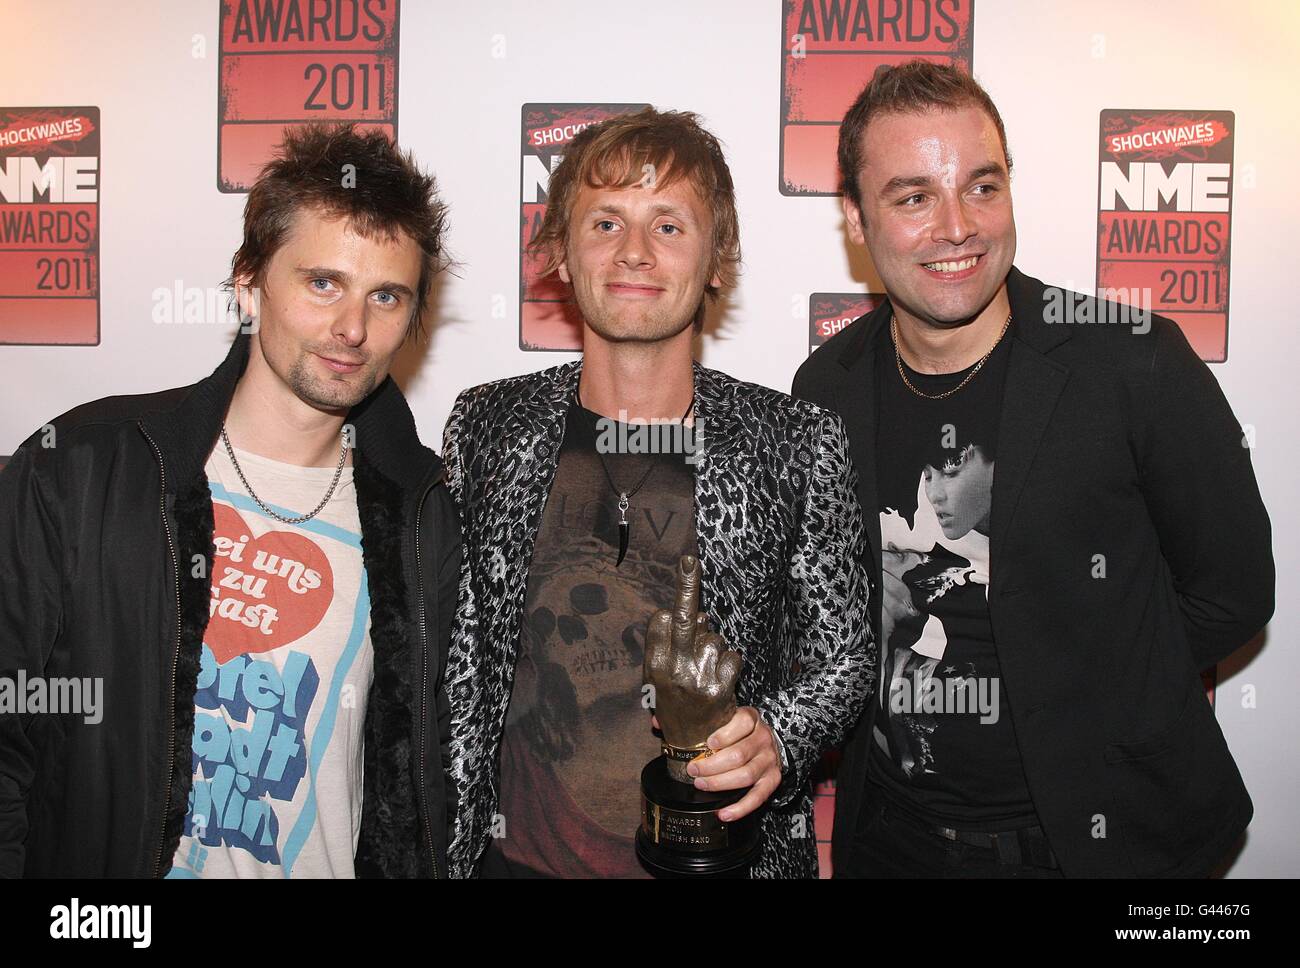 Muse with the Hottest Man award, awarded to Matt Bellamy (left) during the 2011 NME Awards at the O2 Academy, Brixton, London Stock Photo